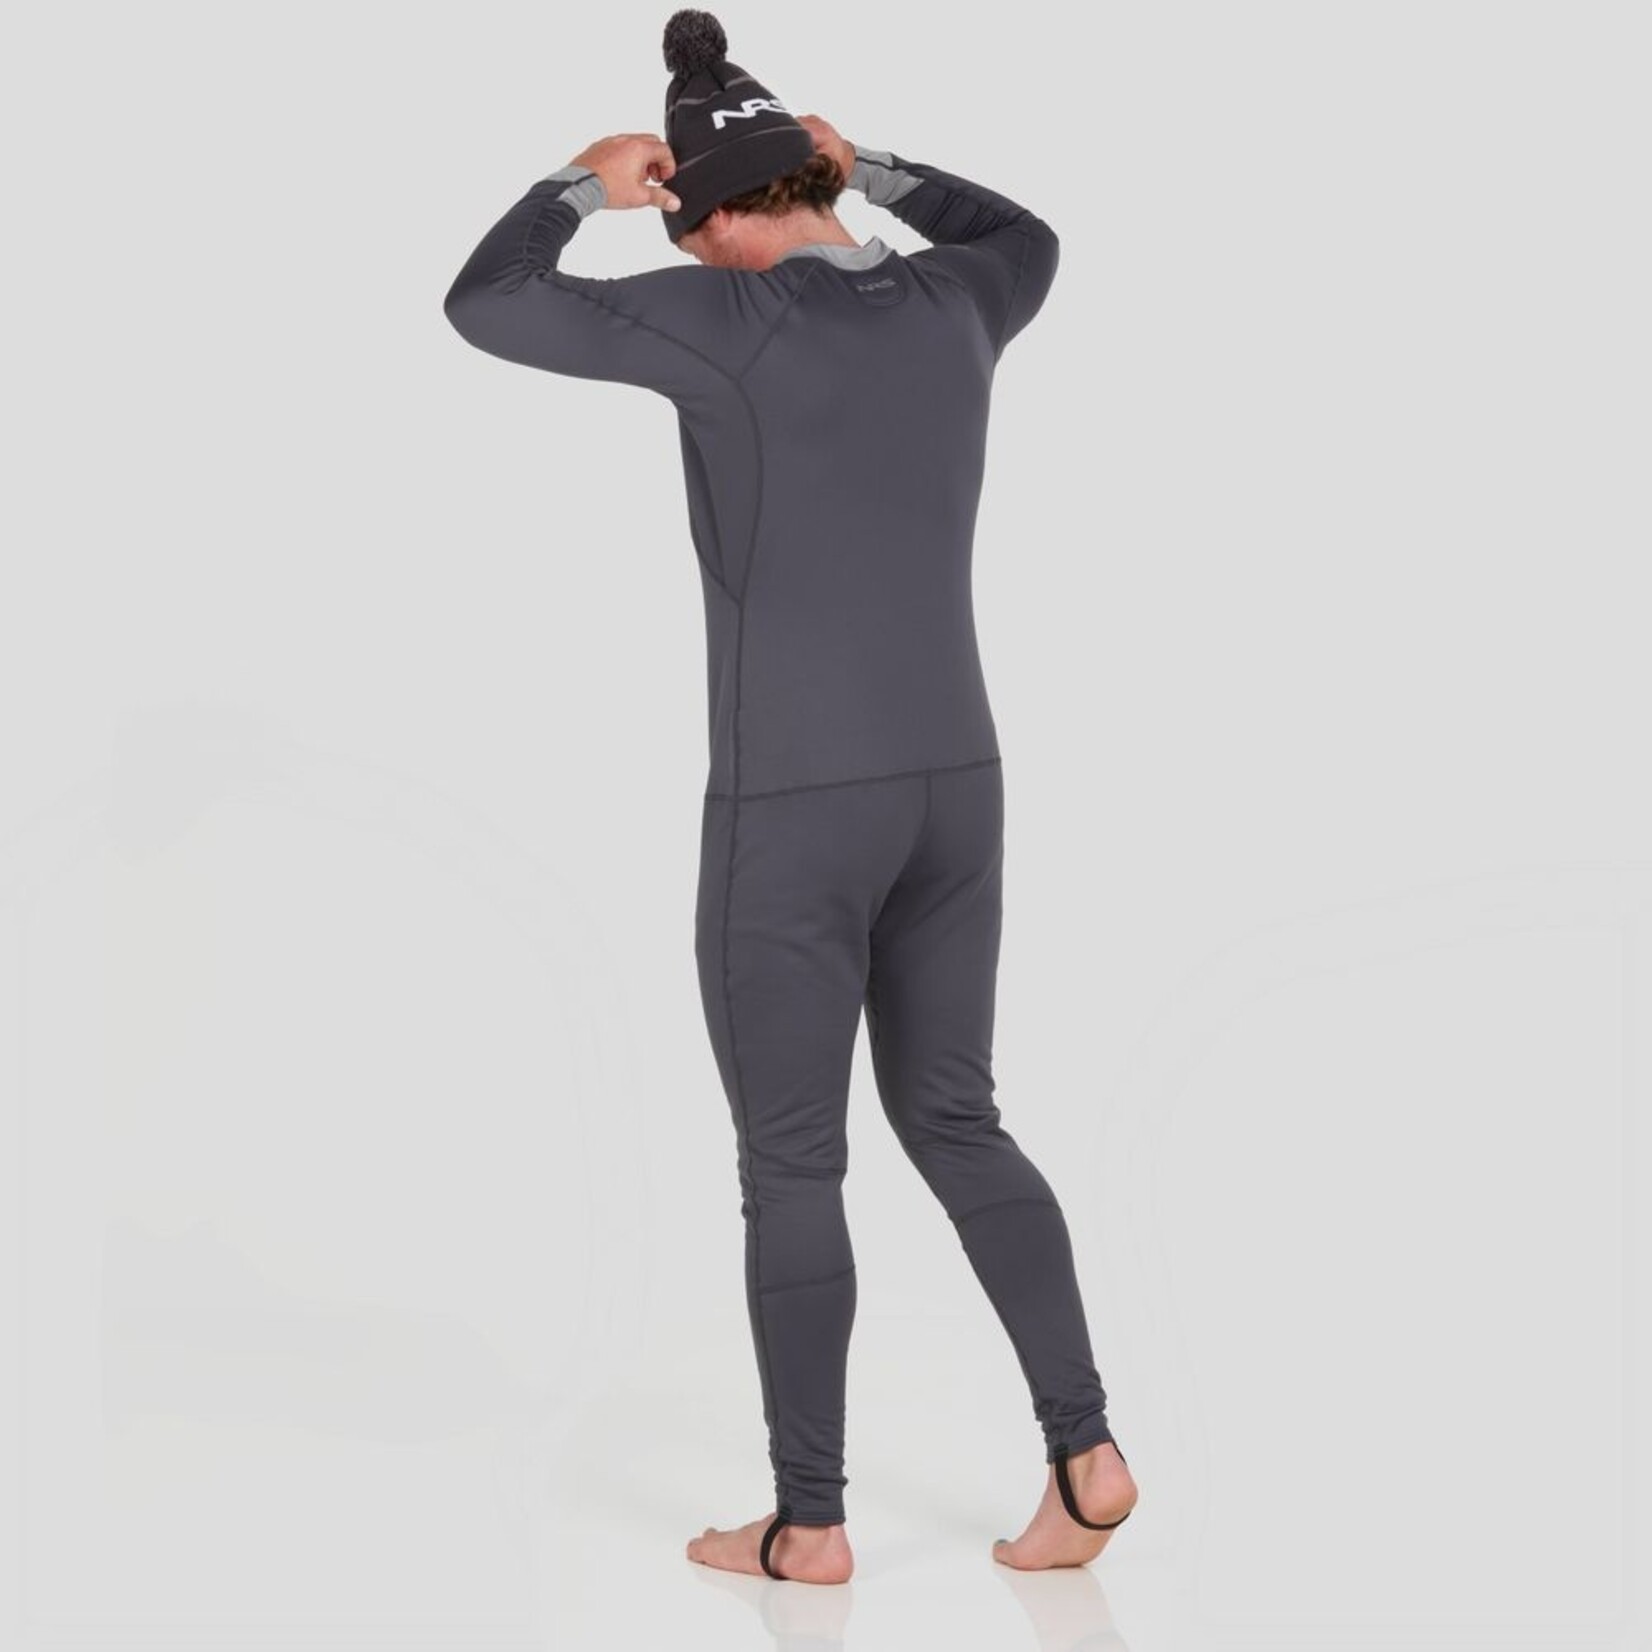 NRS, Inc NRS Men's Expedition Weight Union Suit